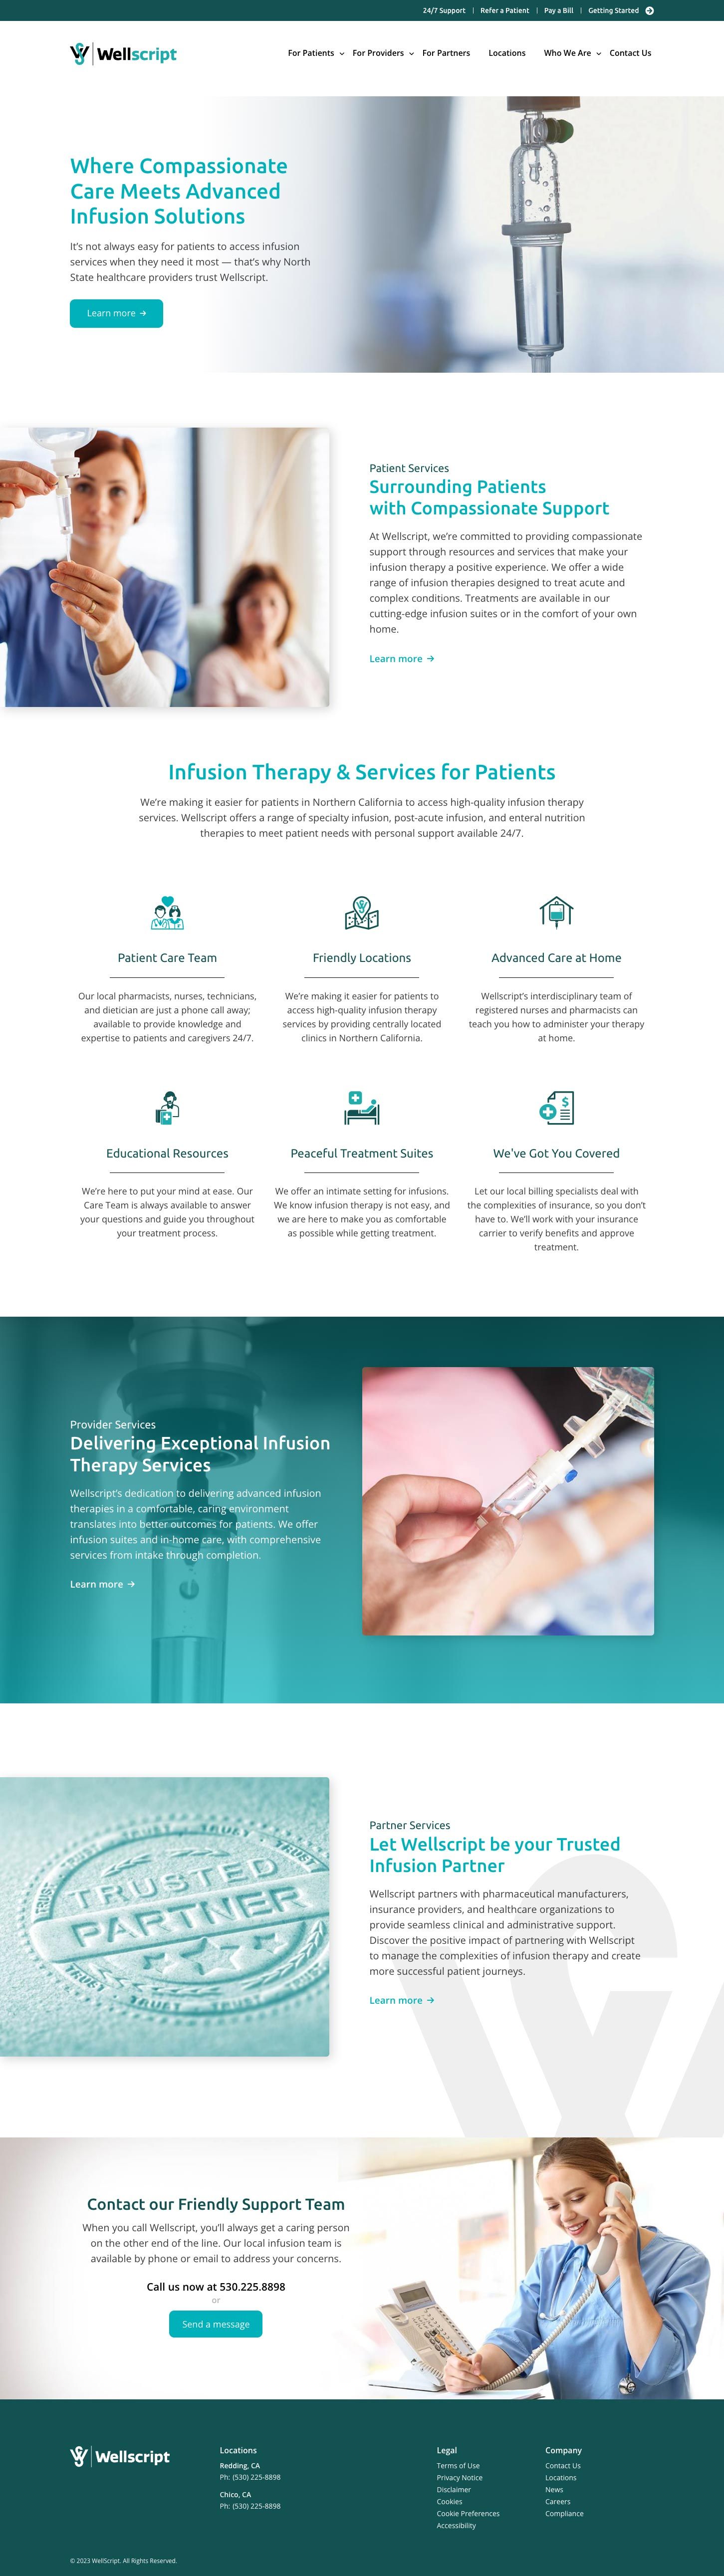 Wellscript Infusion Therapy Services Website